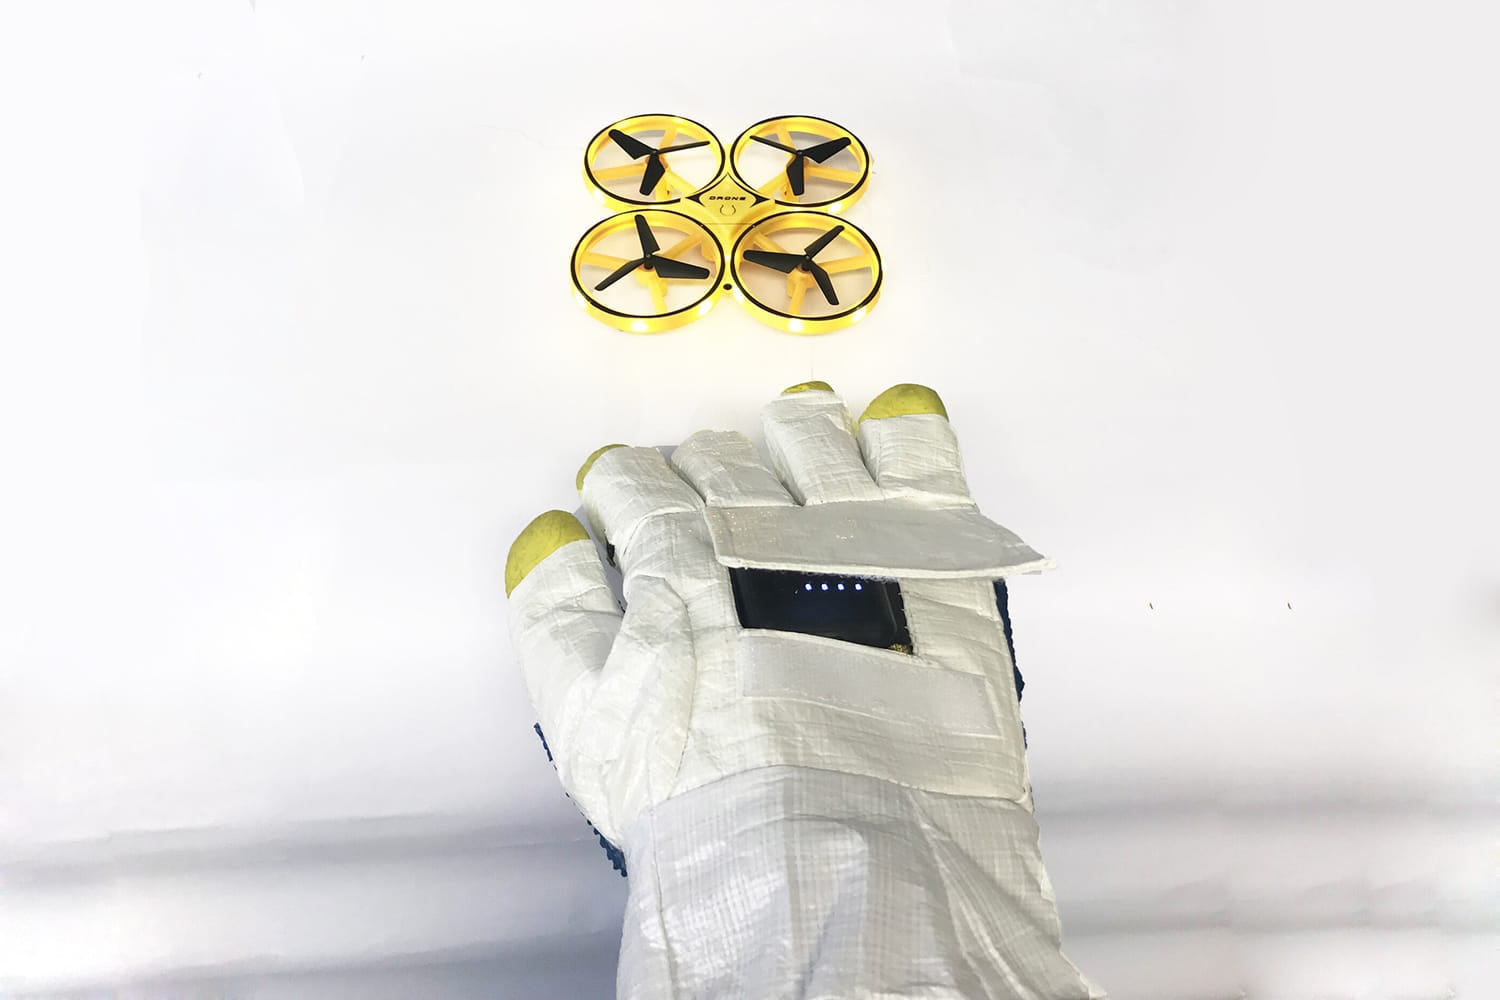 ESA's concept Space gloves of the future.